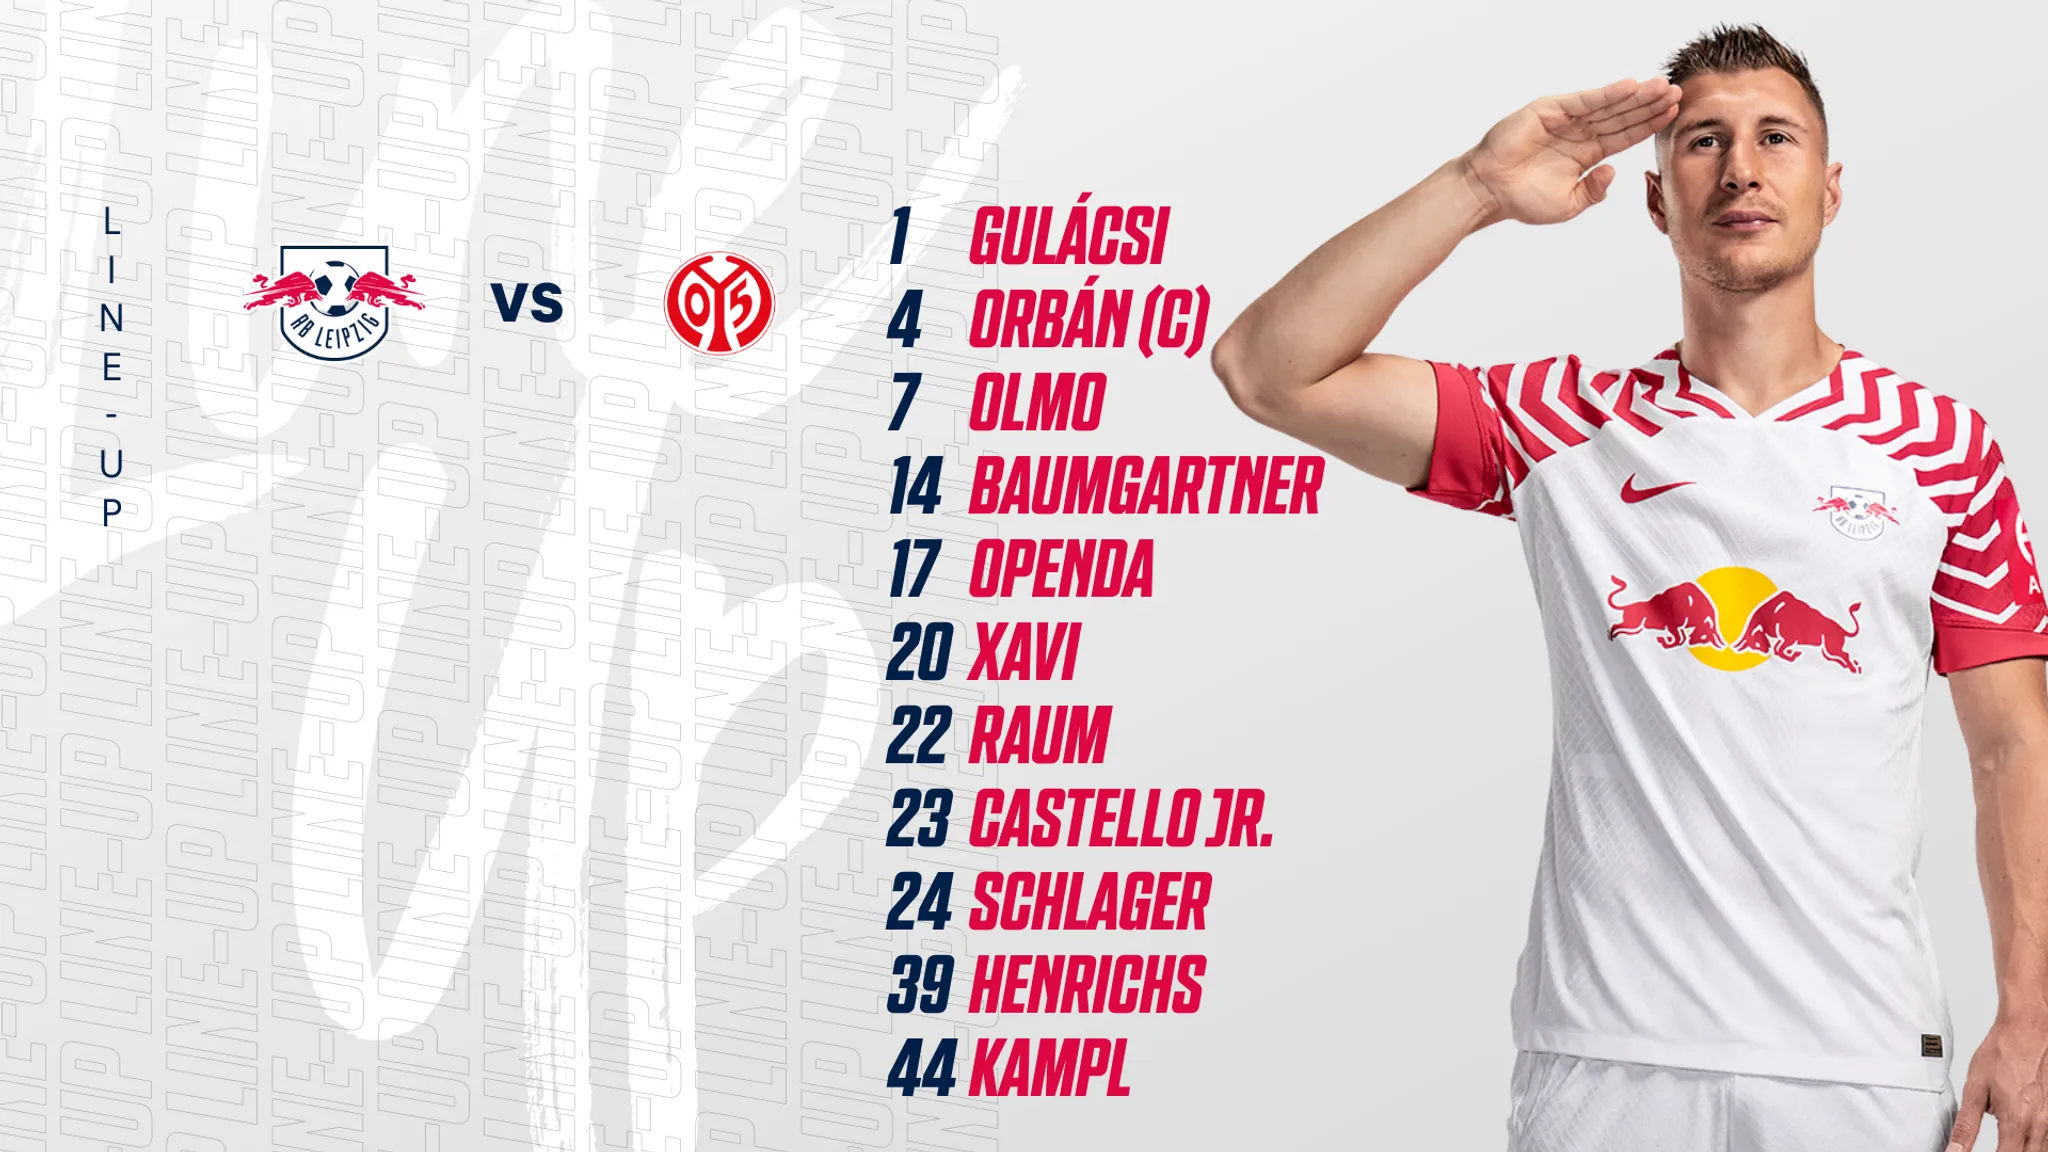 RB Leipzig started with this line-up against 1. FSV Mainz 05.